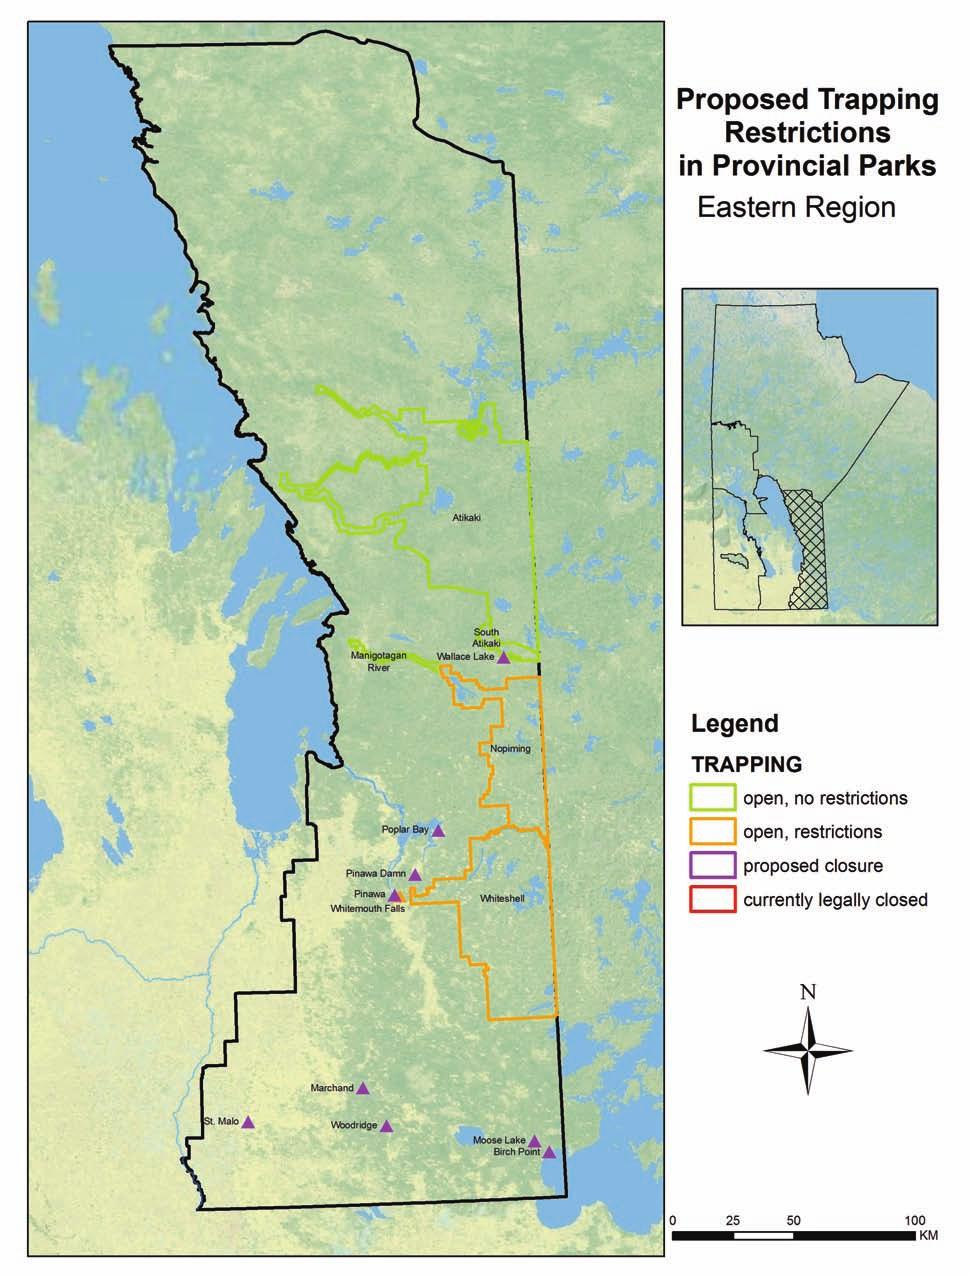 Proposed Trapping Restrictions in Provincial Parks EASTERN